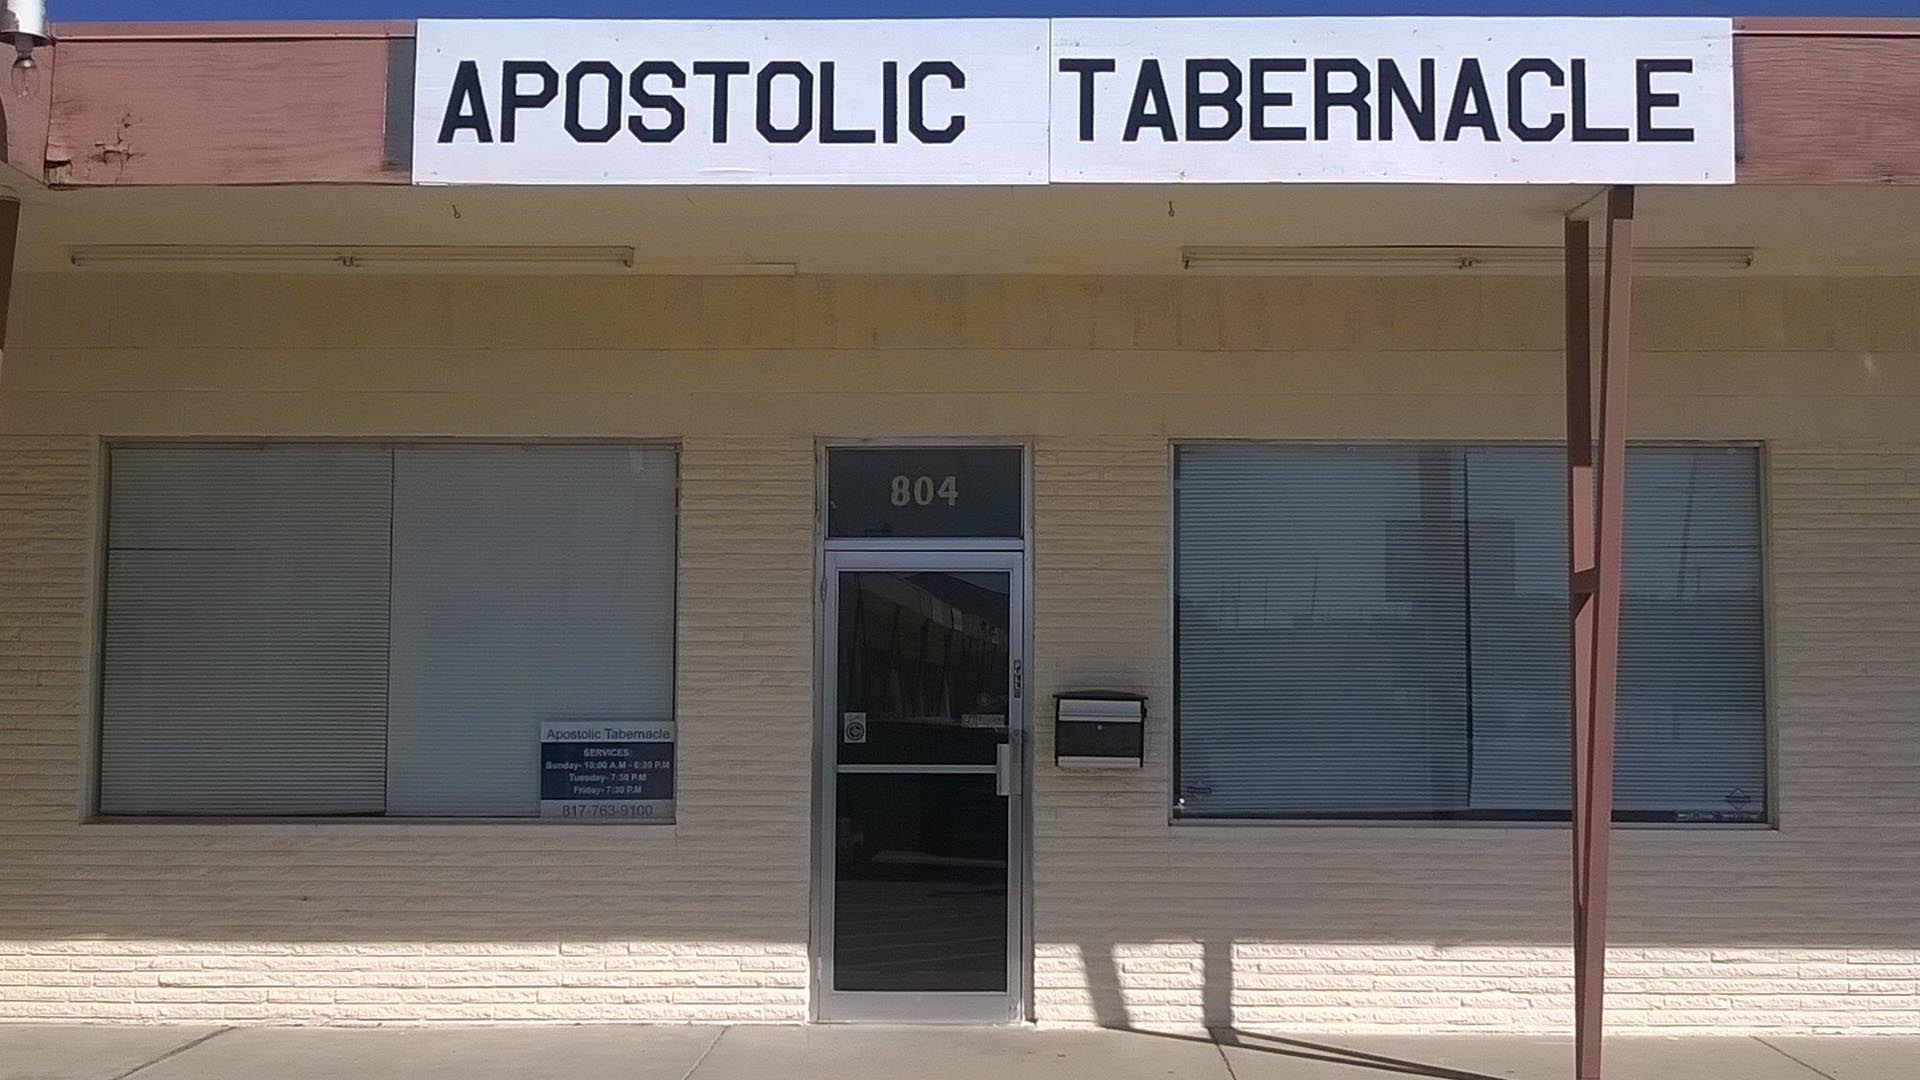 Apostolic Tabernacle Fort Worth: Apostolic, Pentecostal and Church in Fort Worth, Benbrook and White Settlement